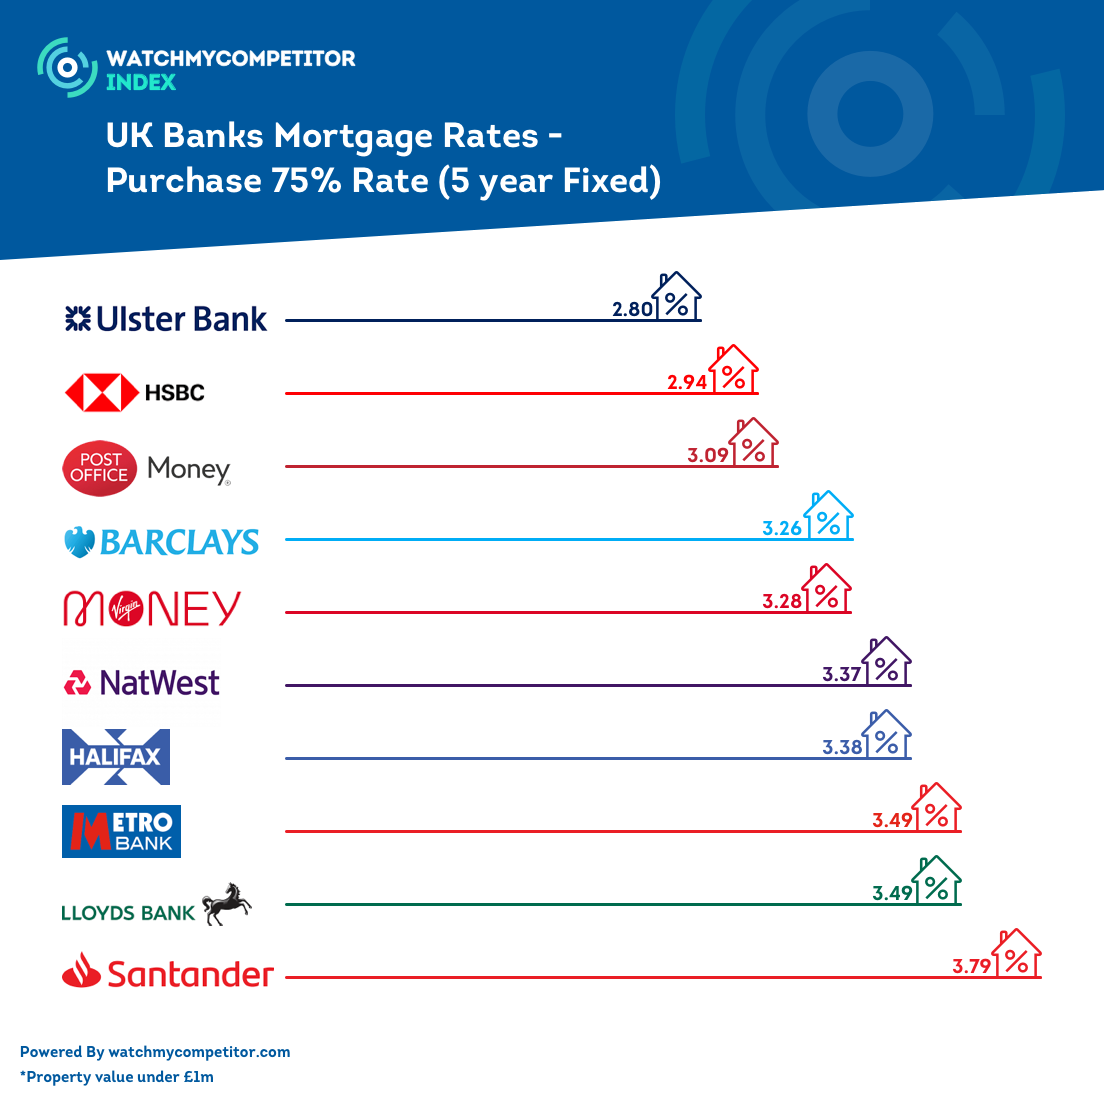 UK Banks Mortgage Rates - Purchase 75% Rate